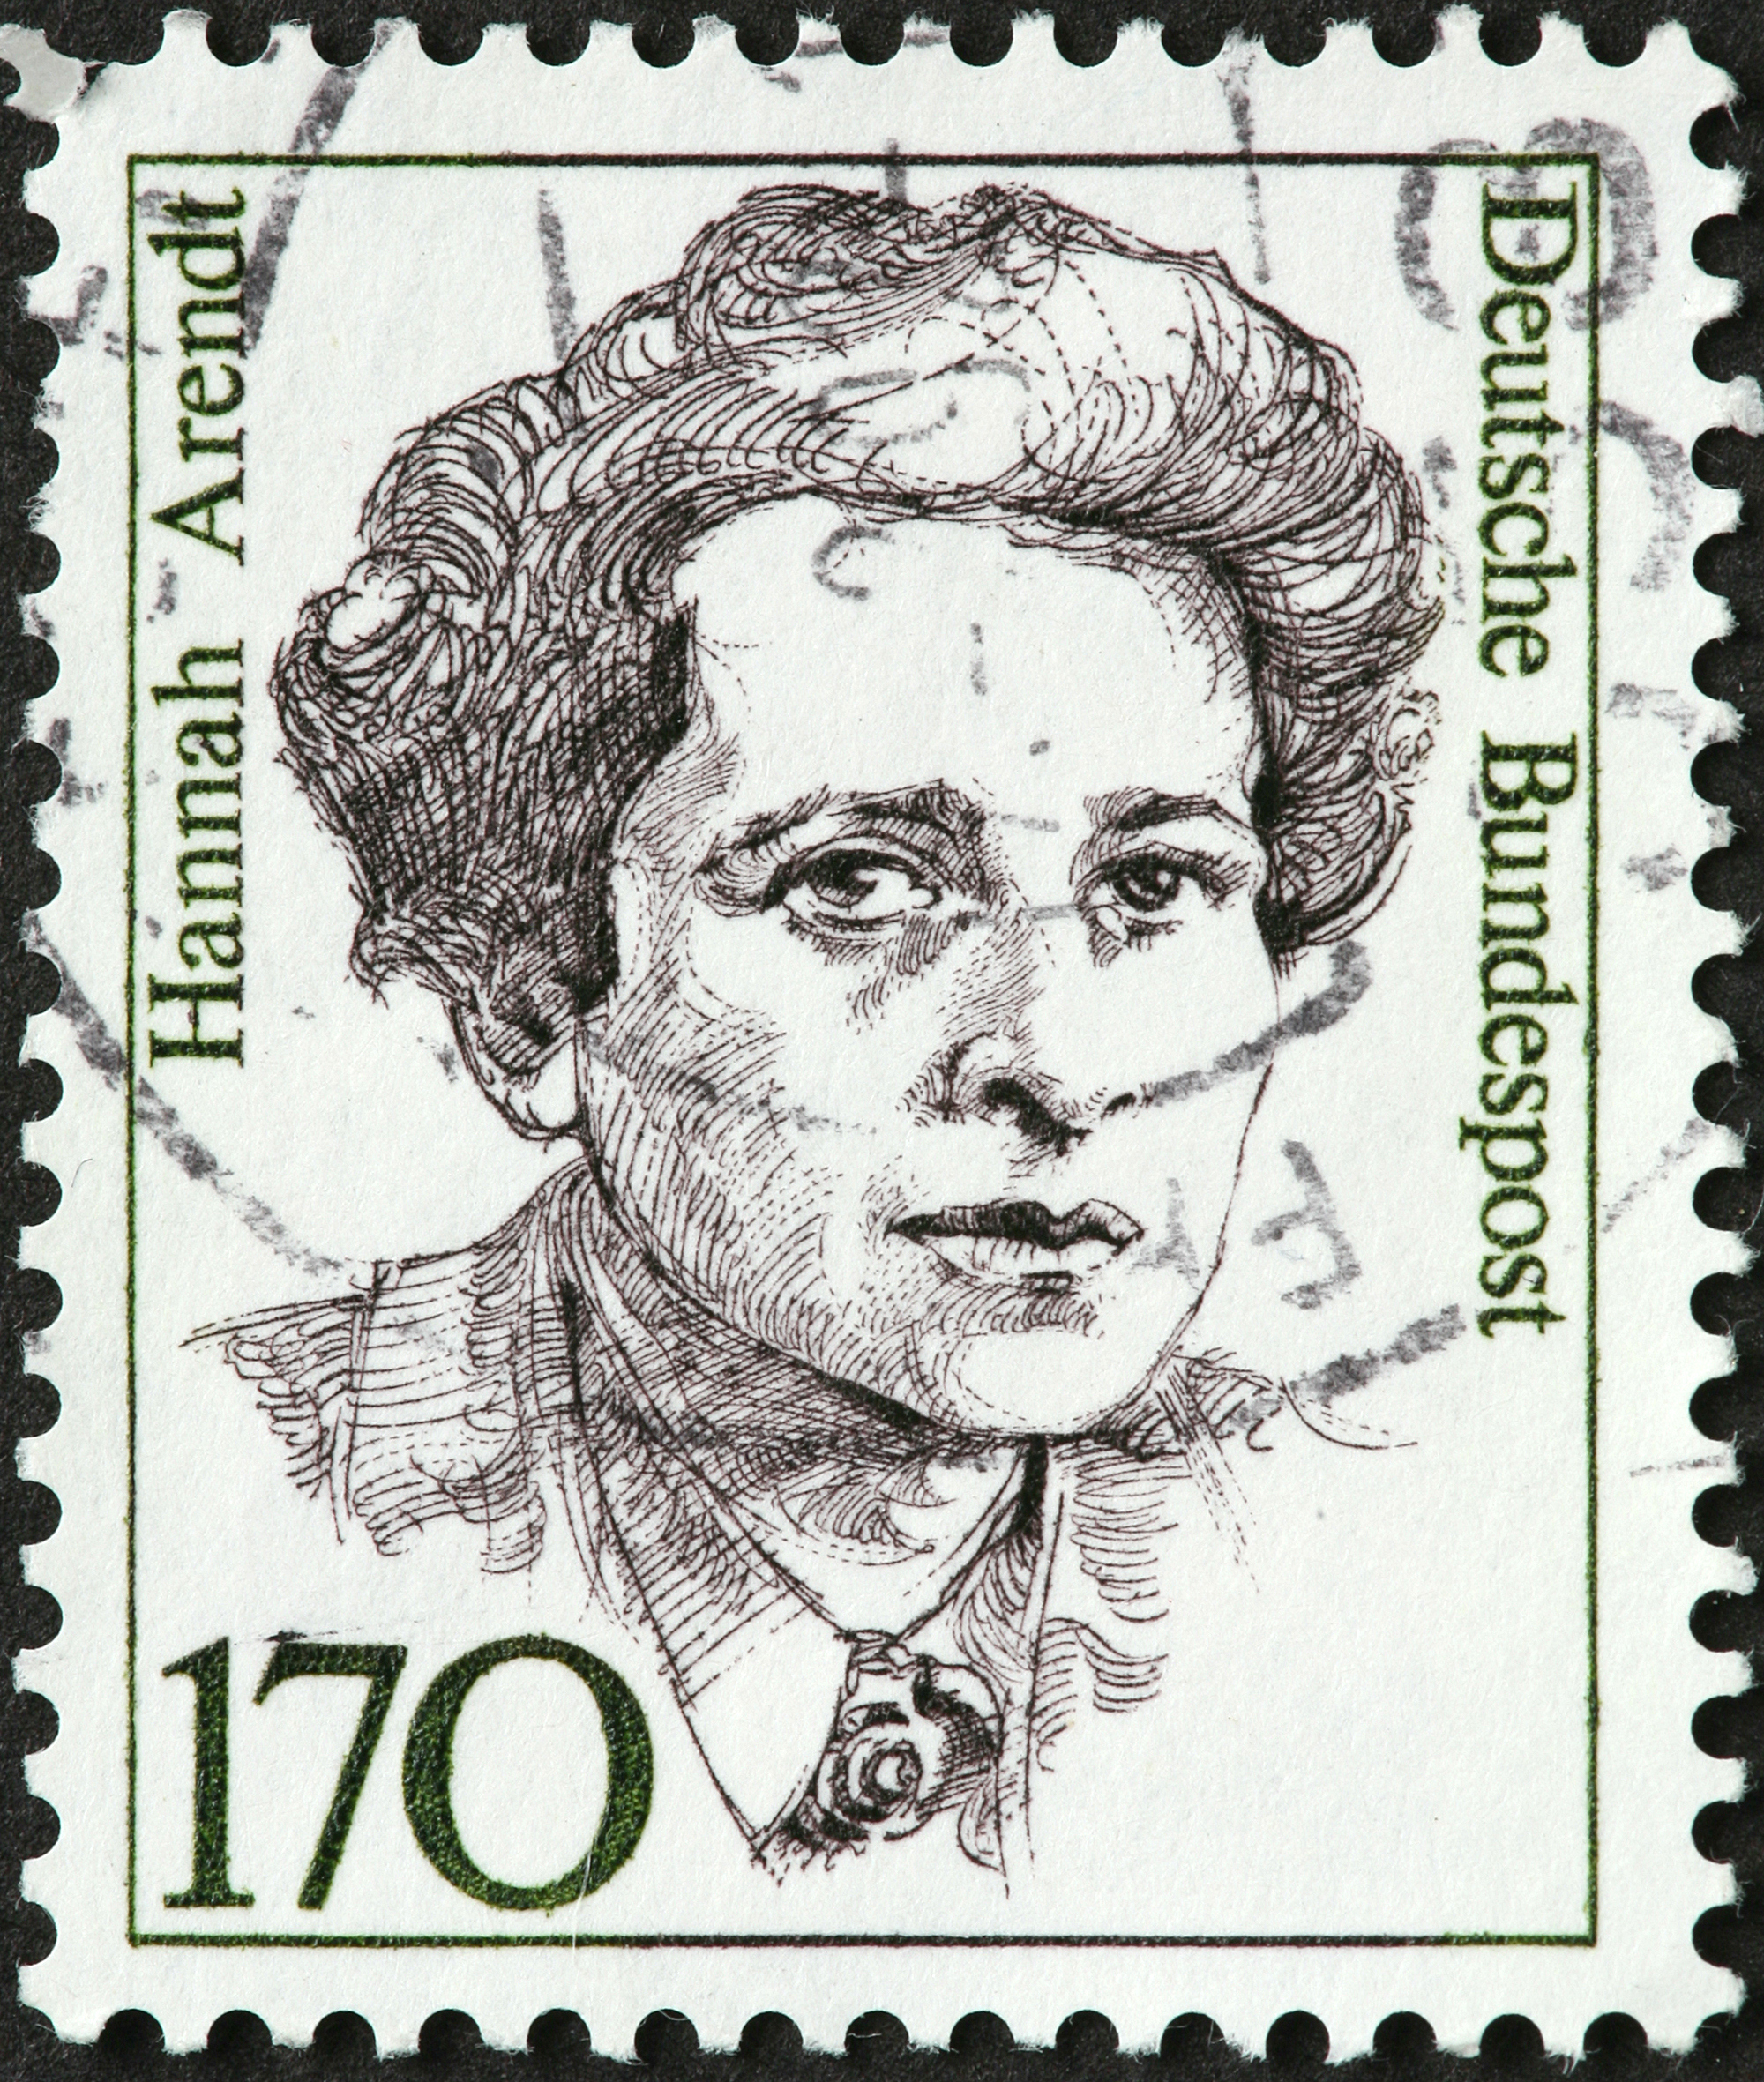 Ardent on a stamp